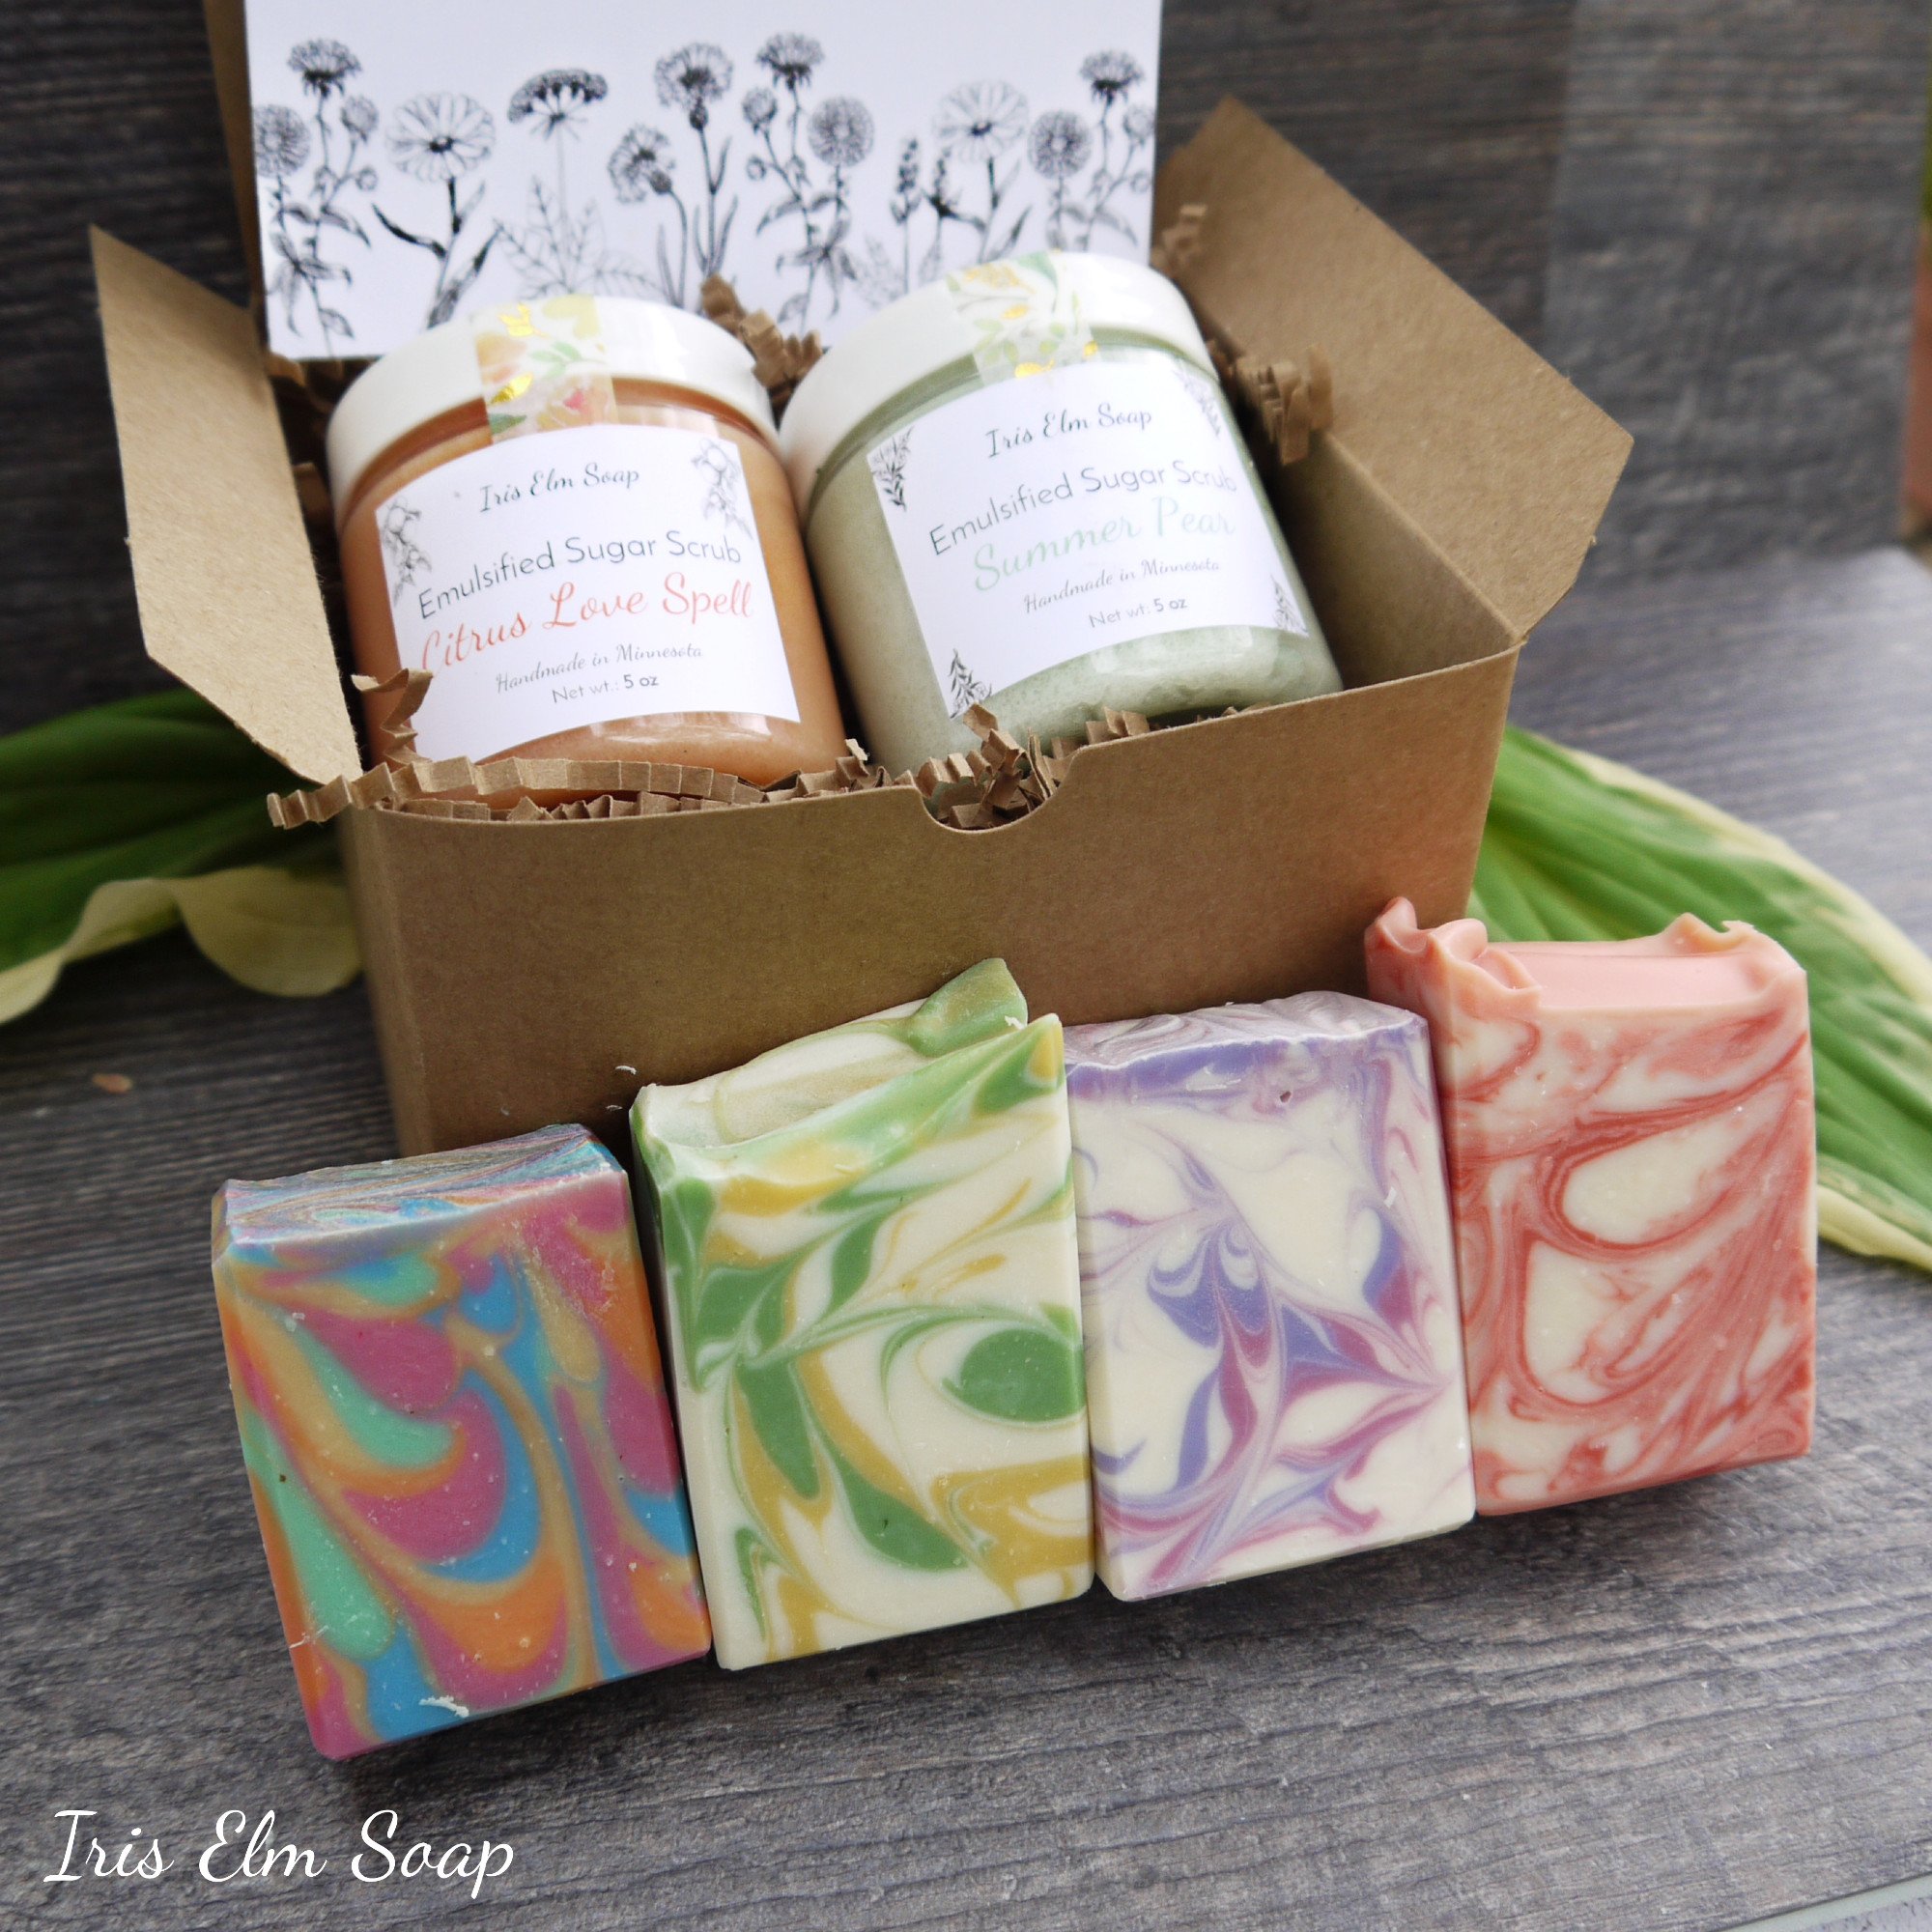 Fruit Scented Soap and Sugar Scrub Gift Box